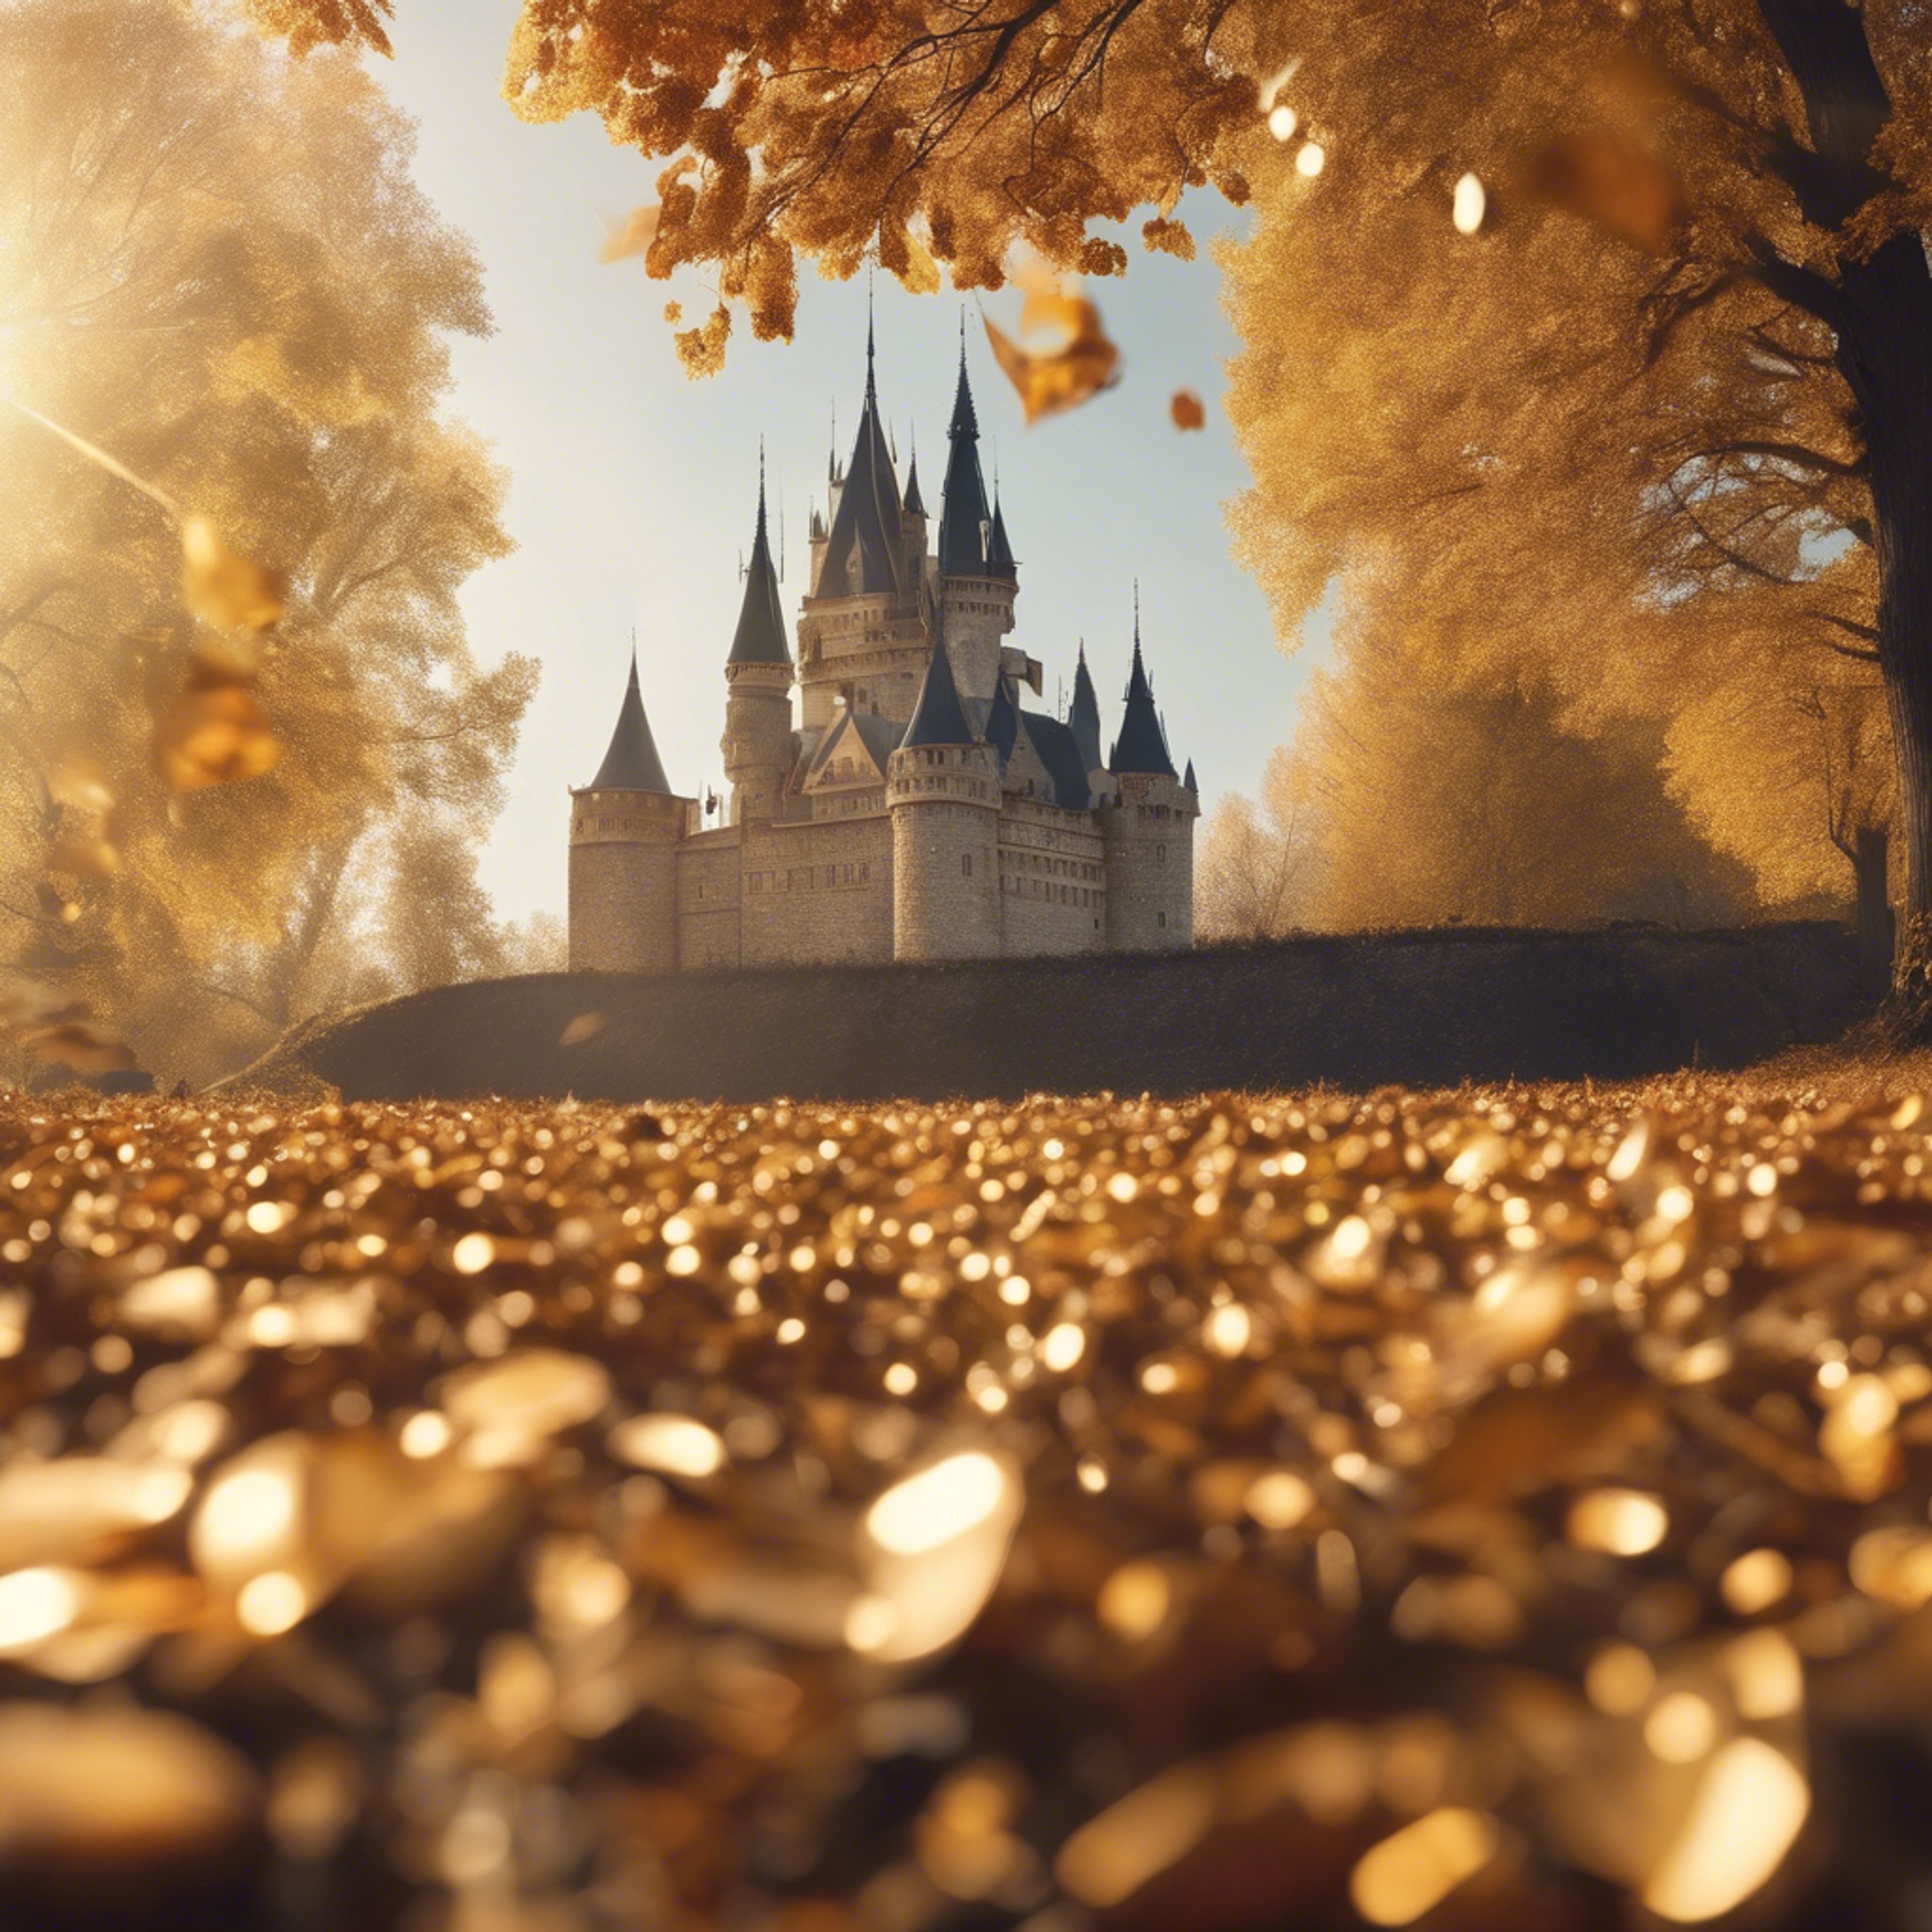 A magical golden castle glinting in the mild autumn sunlight of a dream.壁紙[fa1039930bce49dbbf0b]